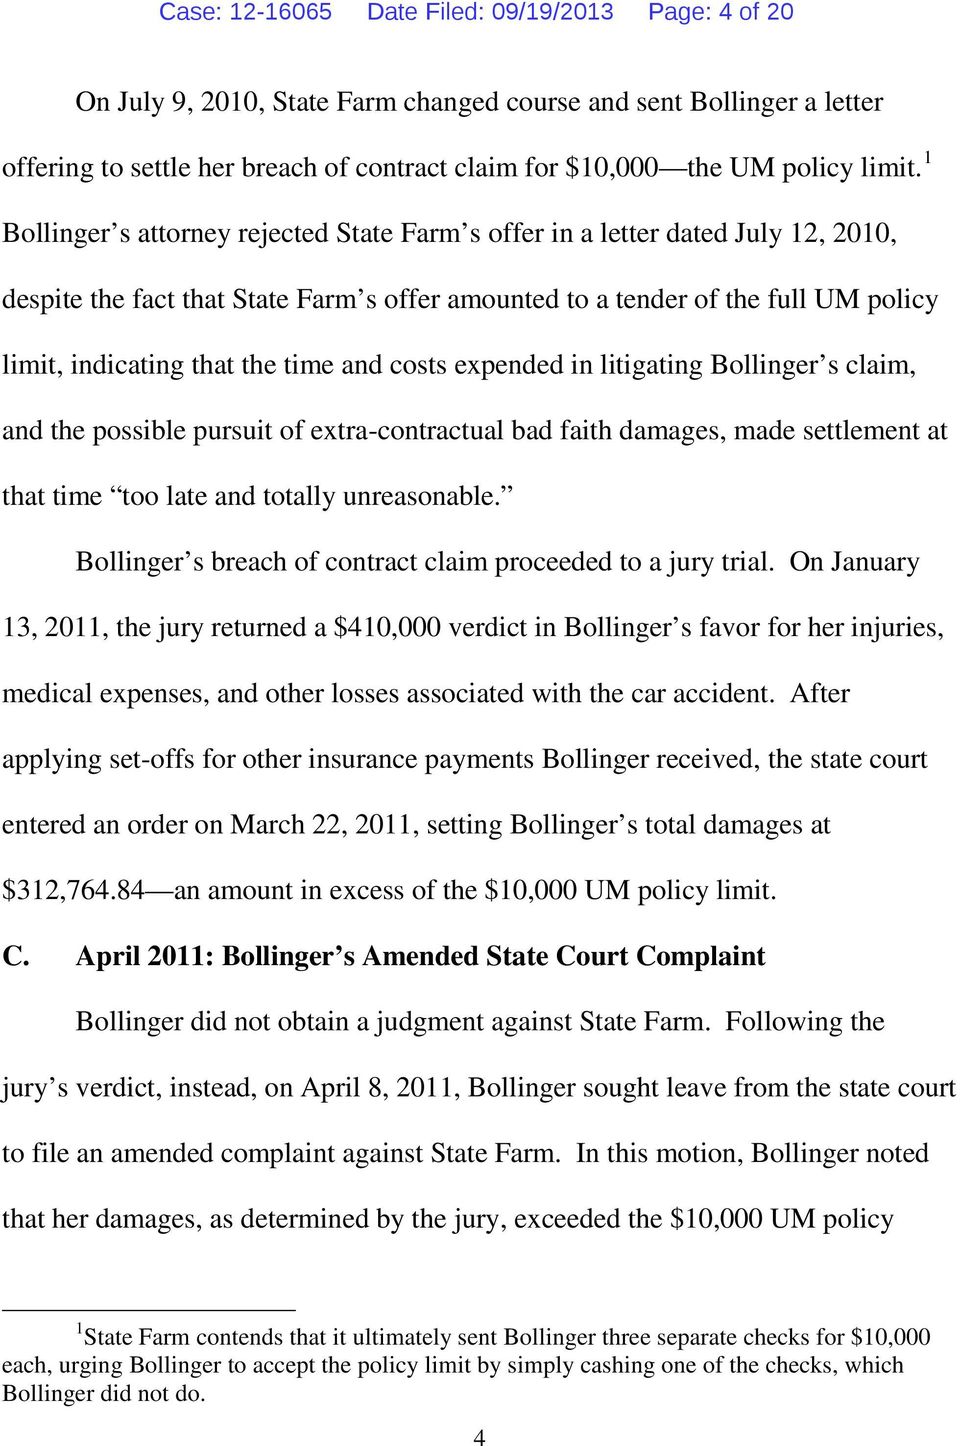 1 Bollinger s attorney rejected State Farm s offer in a letter dated July 12, 2010, despite the fact that State Farm s offer amounted to a tender of the full UM policy limit, indicating that the time